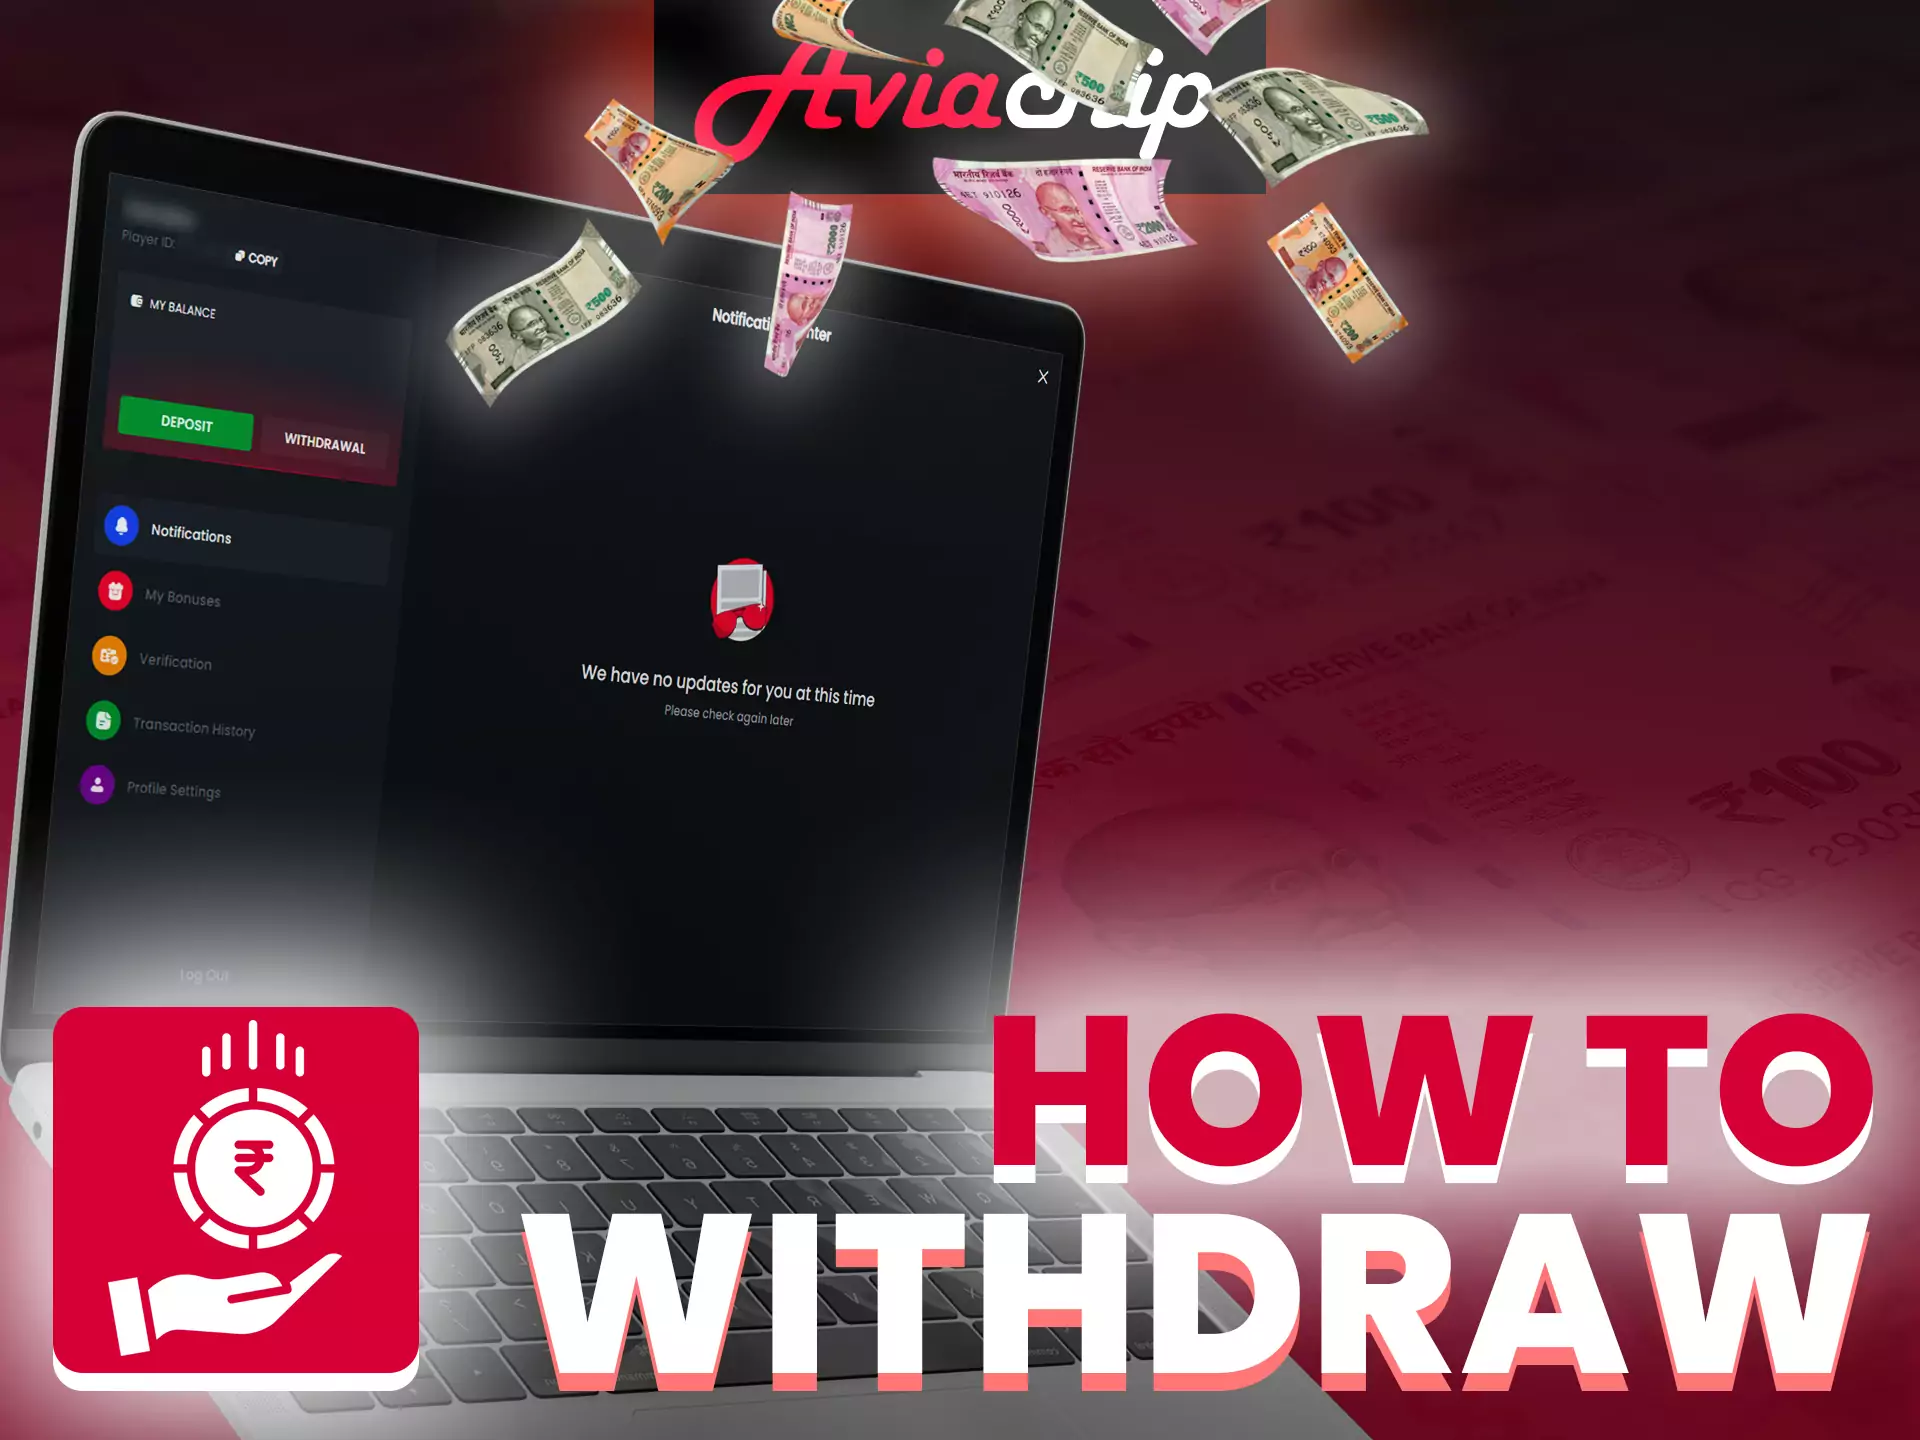 Find out how easy it is to withdraw your winnings from Aviachip.